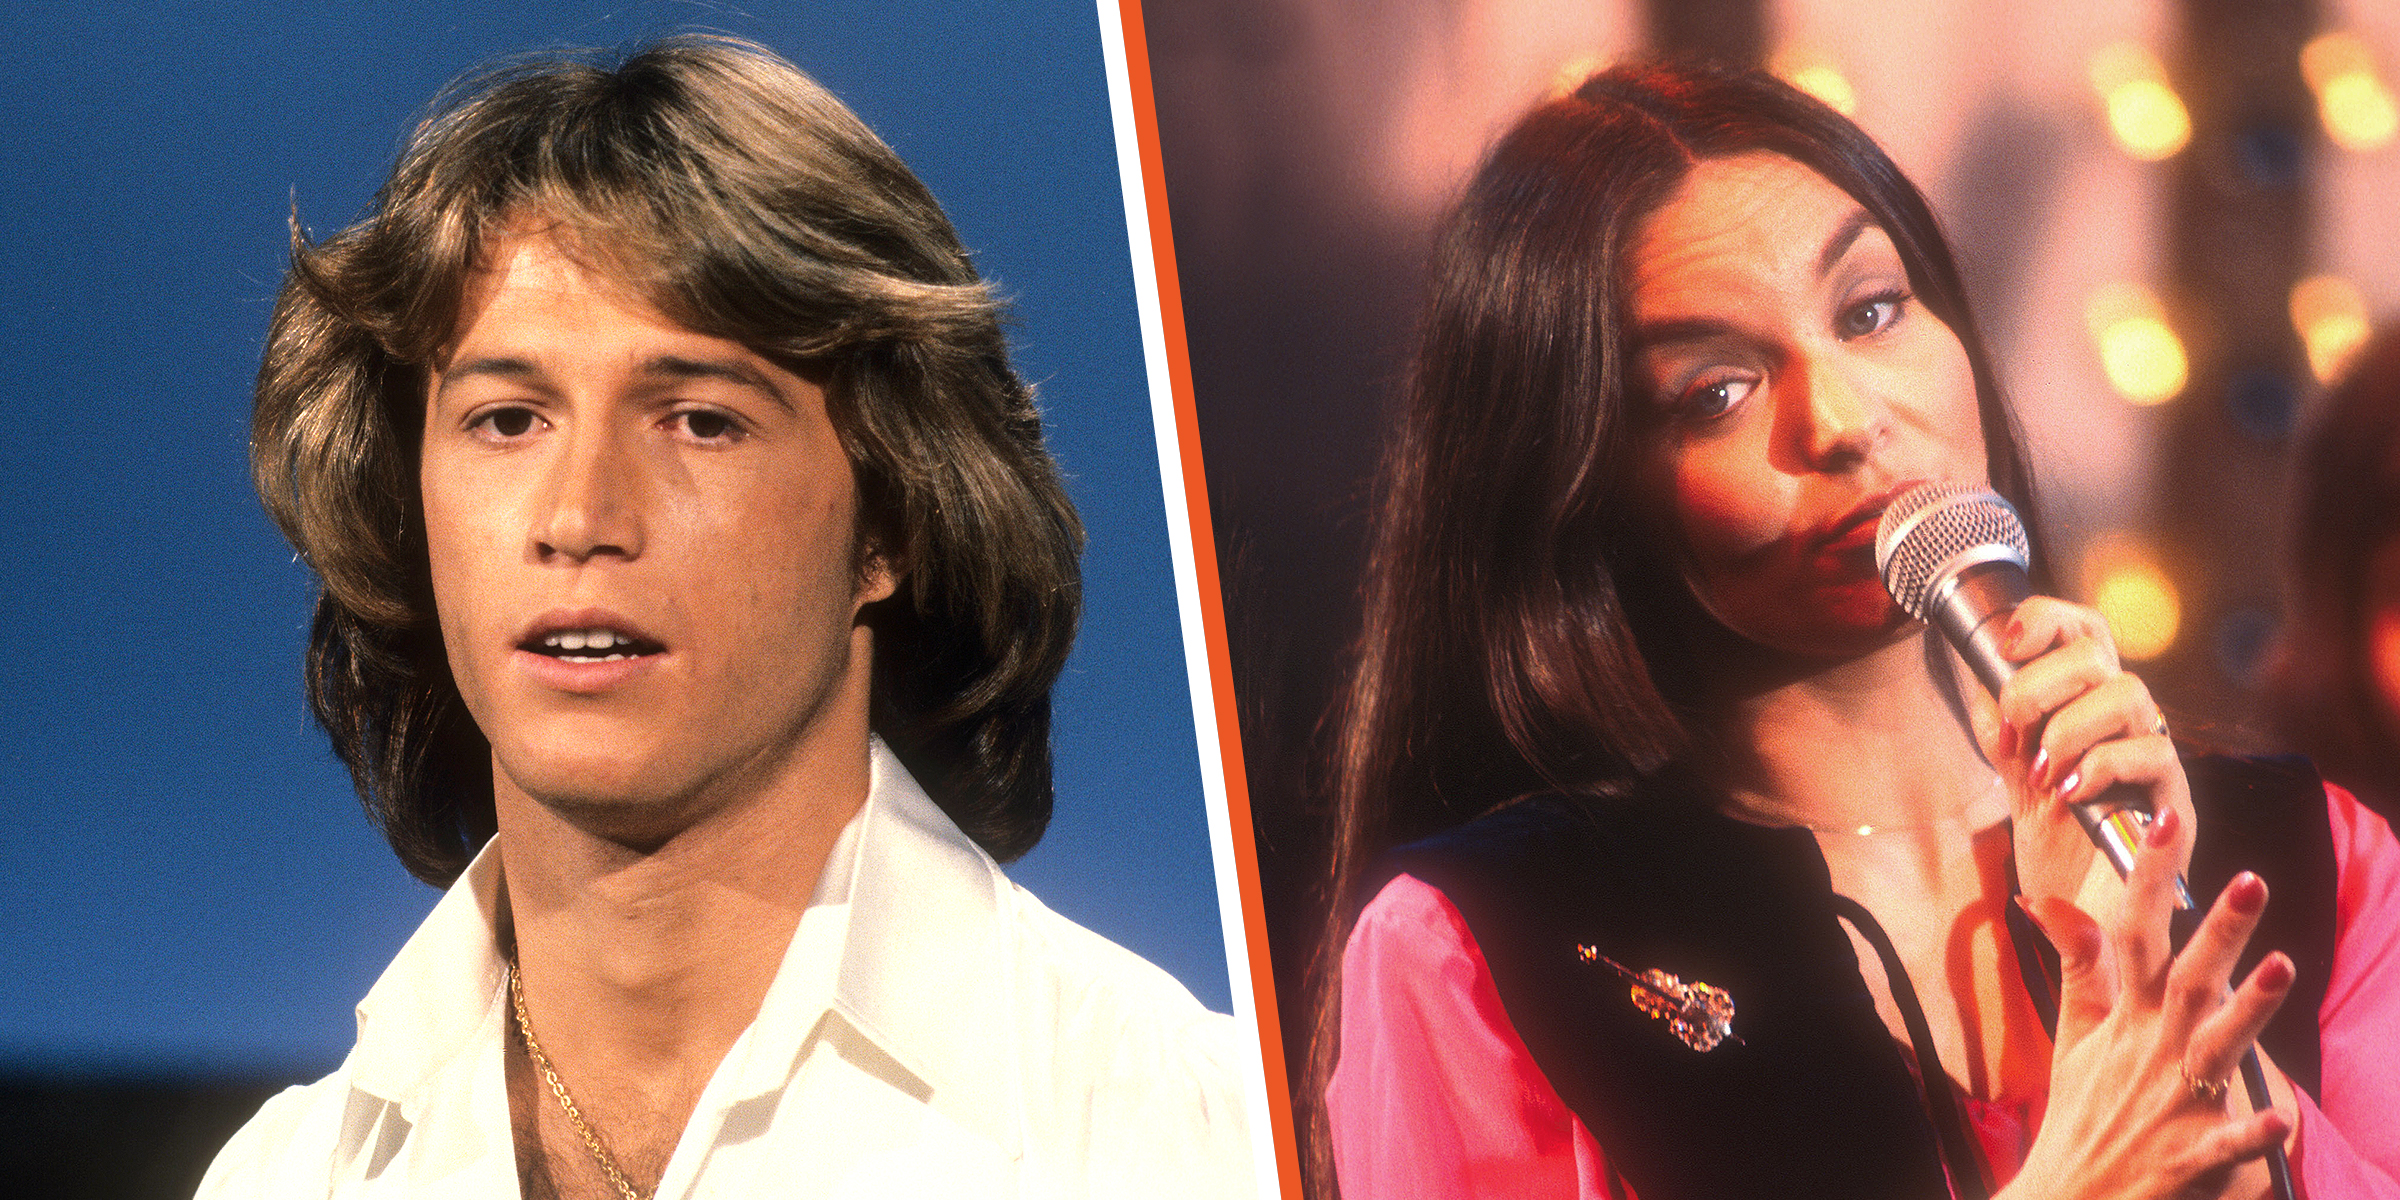 Andy Gibb und Crystal Gayle | Quelle: Getty Images